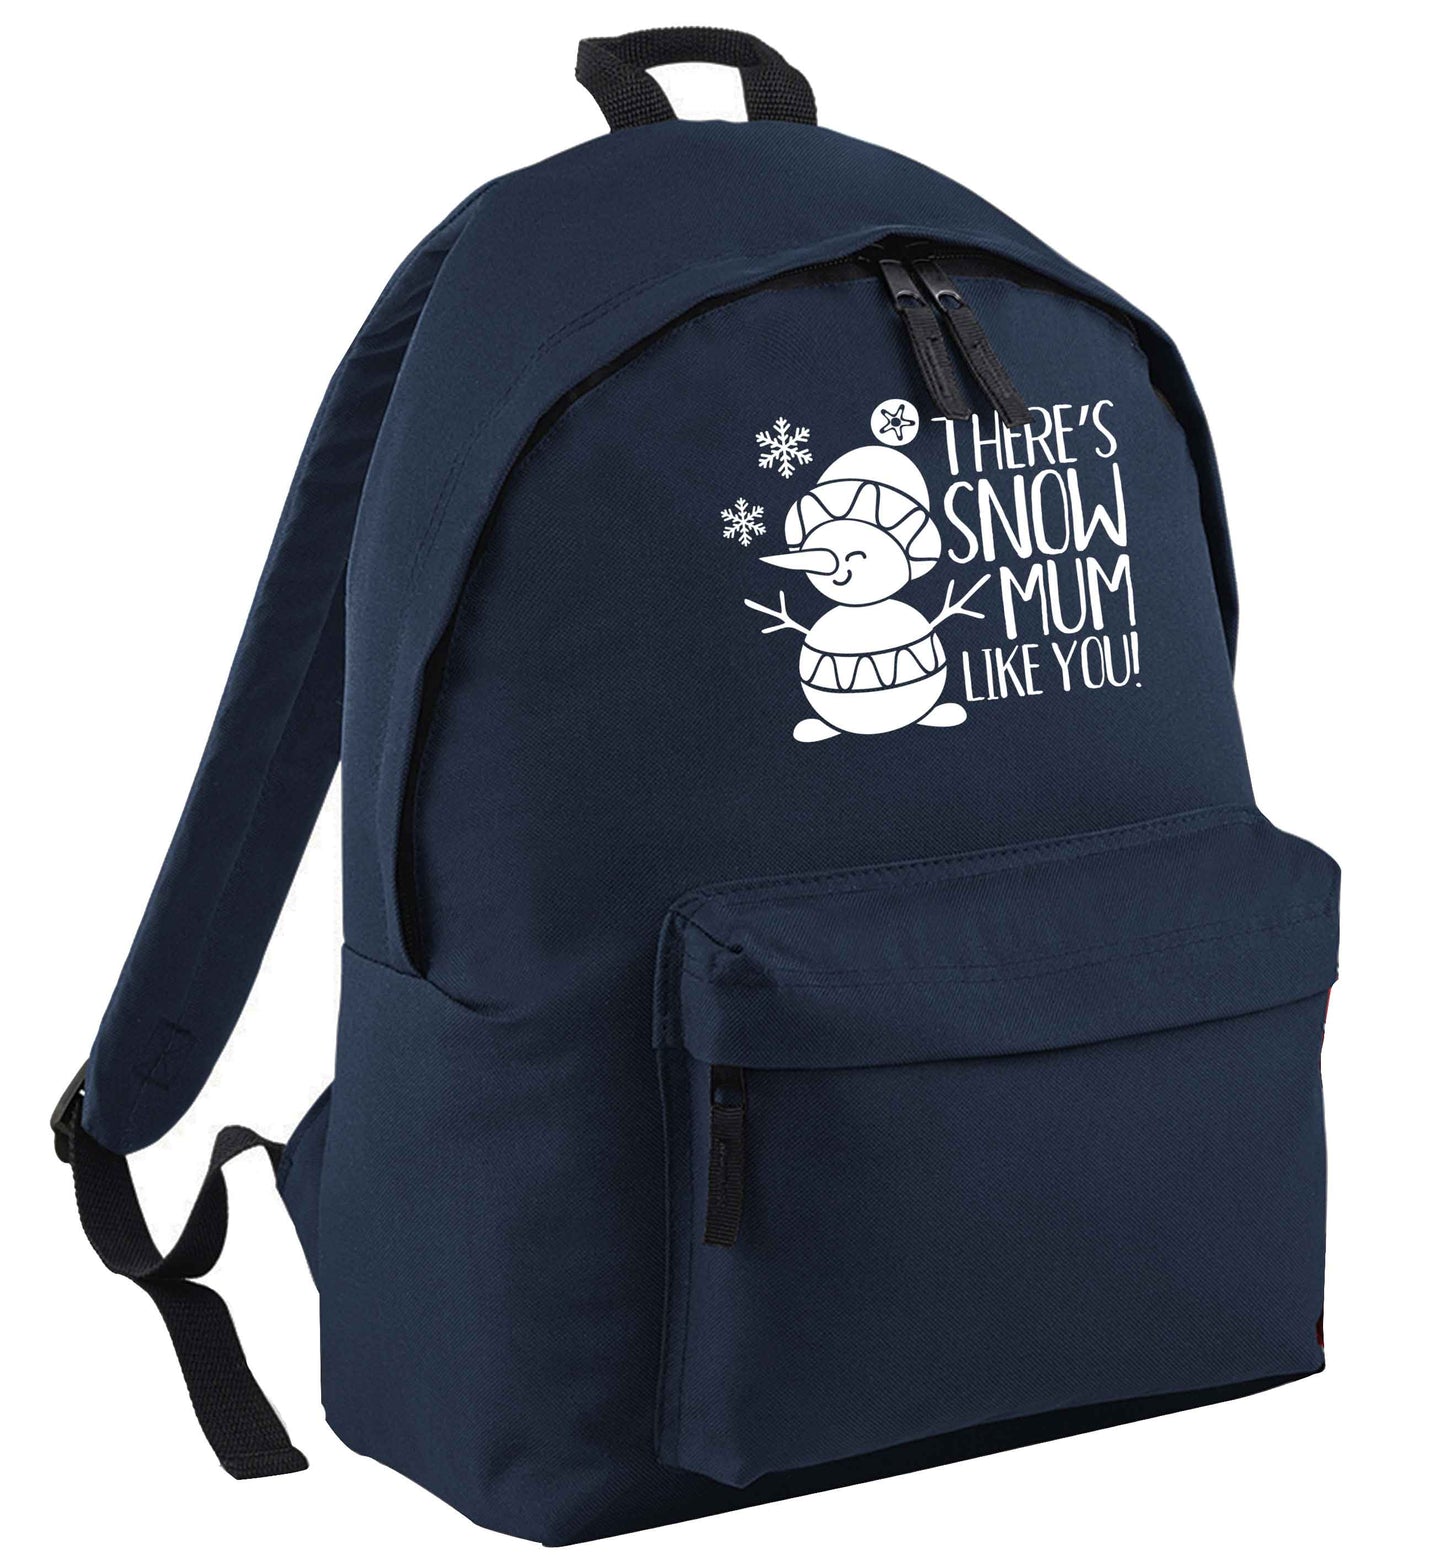 There's snow mum like you navy adults backpack